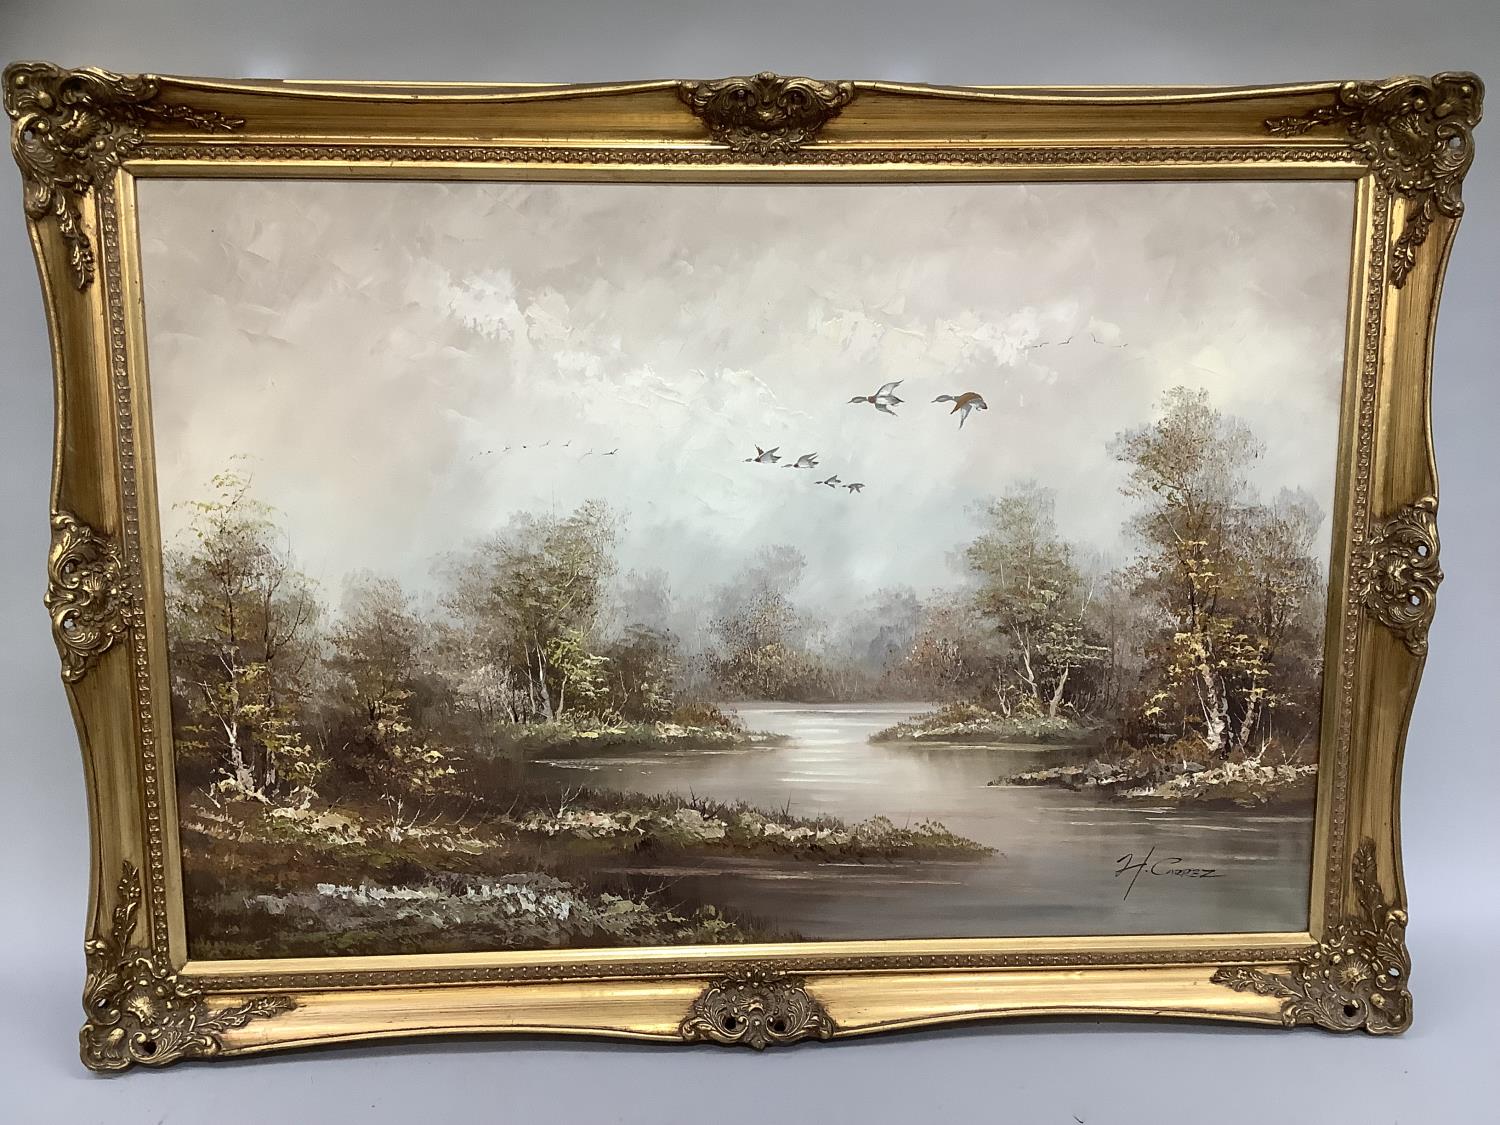 H. Carez, river and woodland with silver birch and geese in flight, oil on canvas, signed to lower